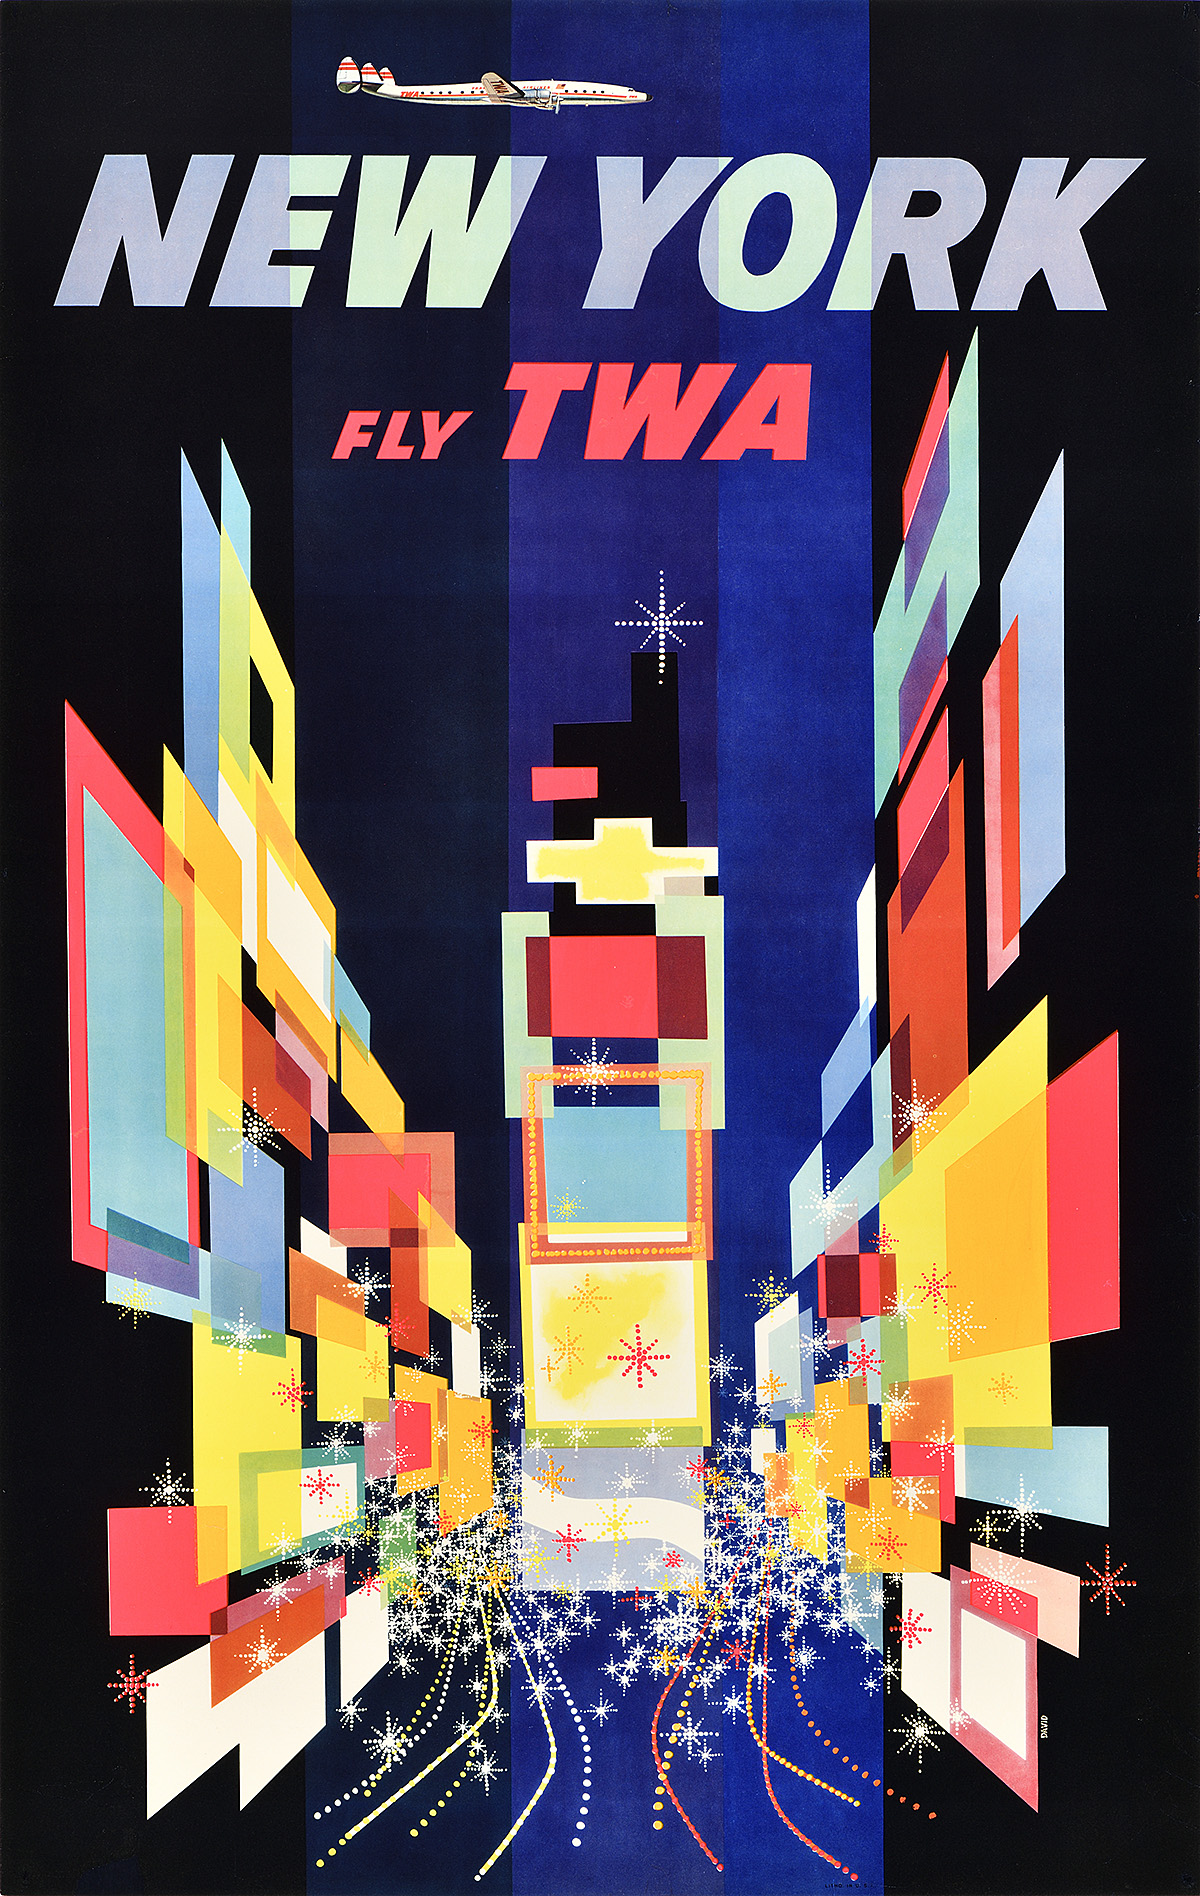 A geometric-style poster of Times Square from the street level with a plane flying overhead.